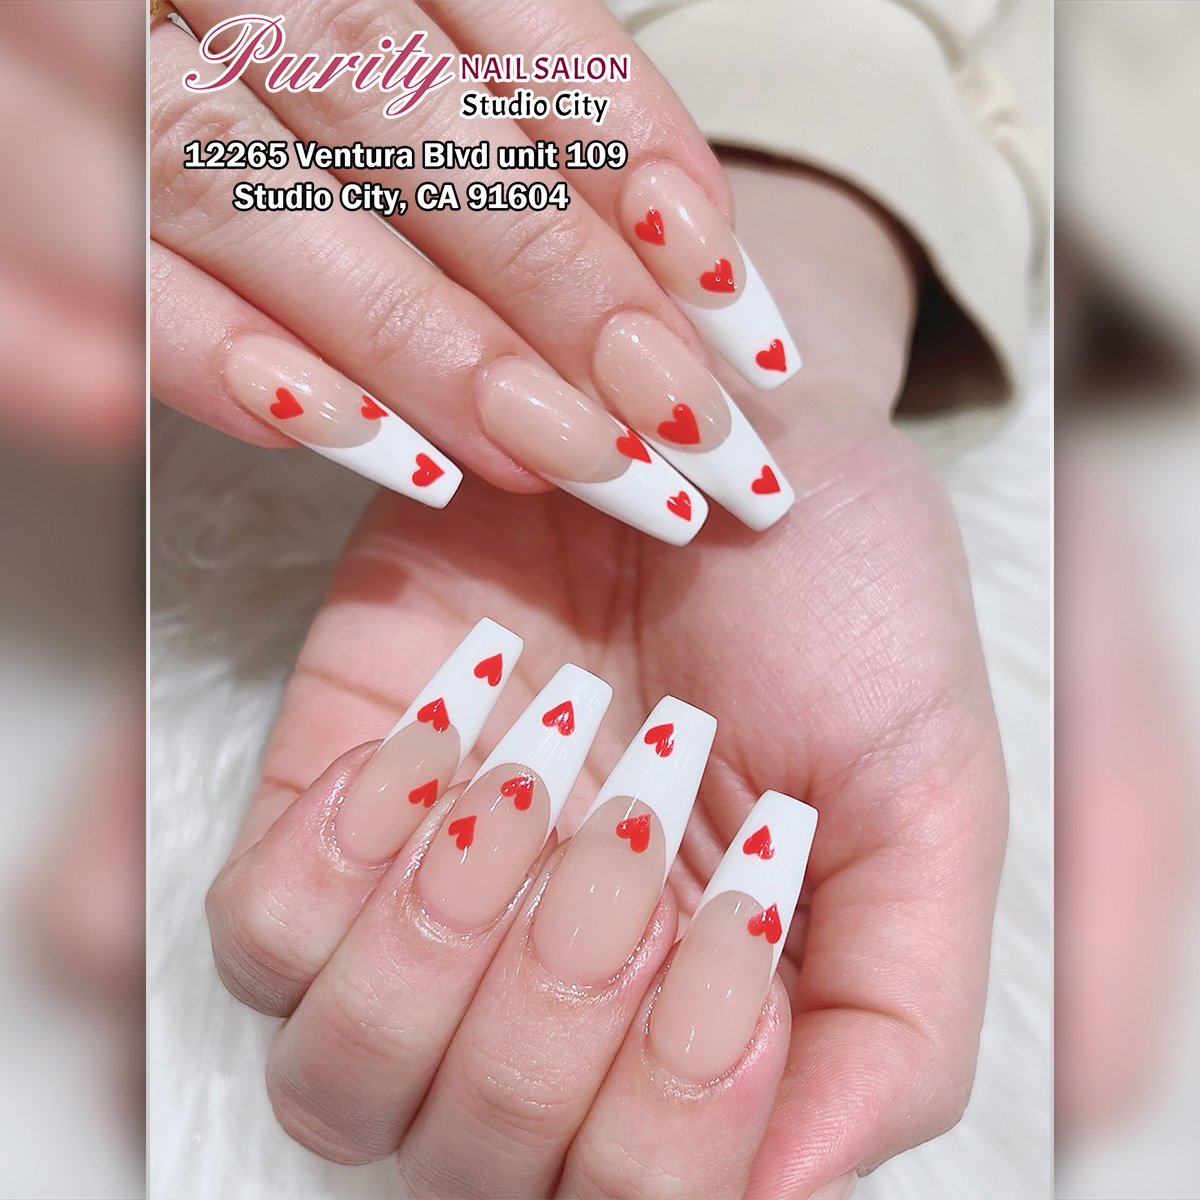 Purity Nail Salon, Studio City : Top create nails design for this